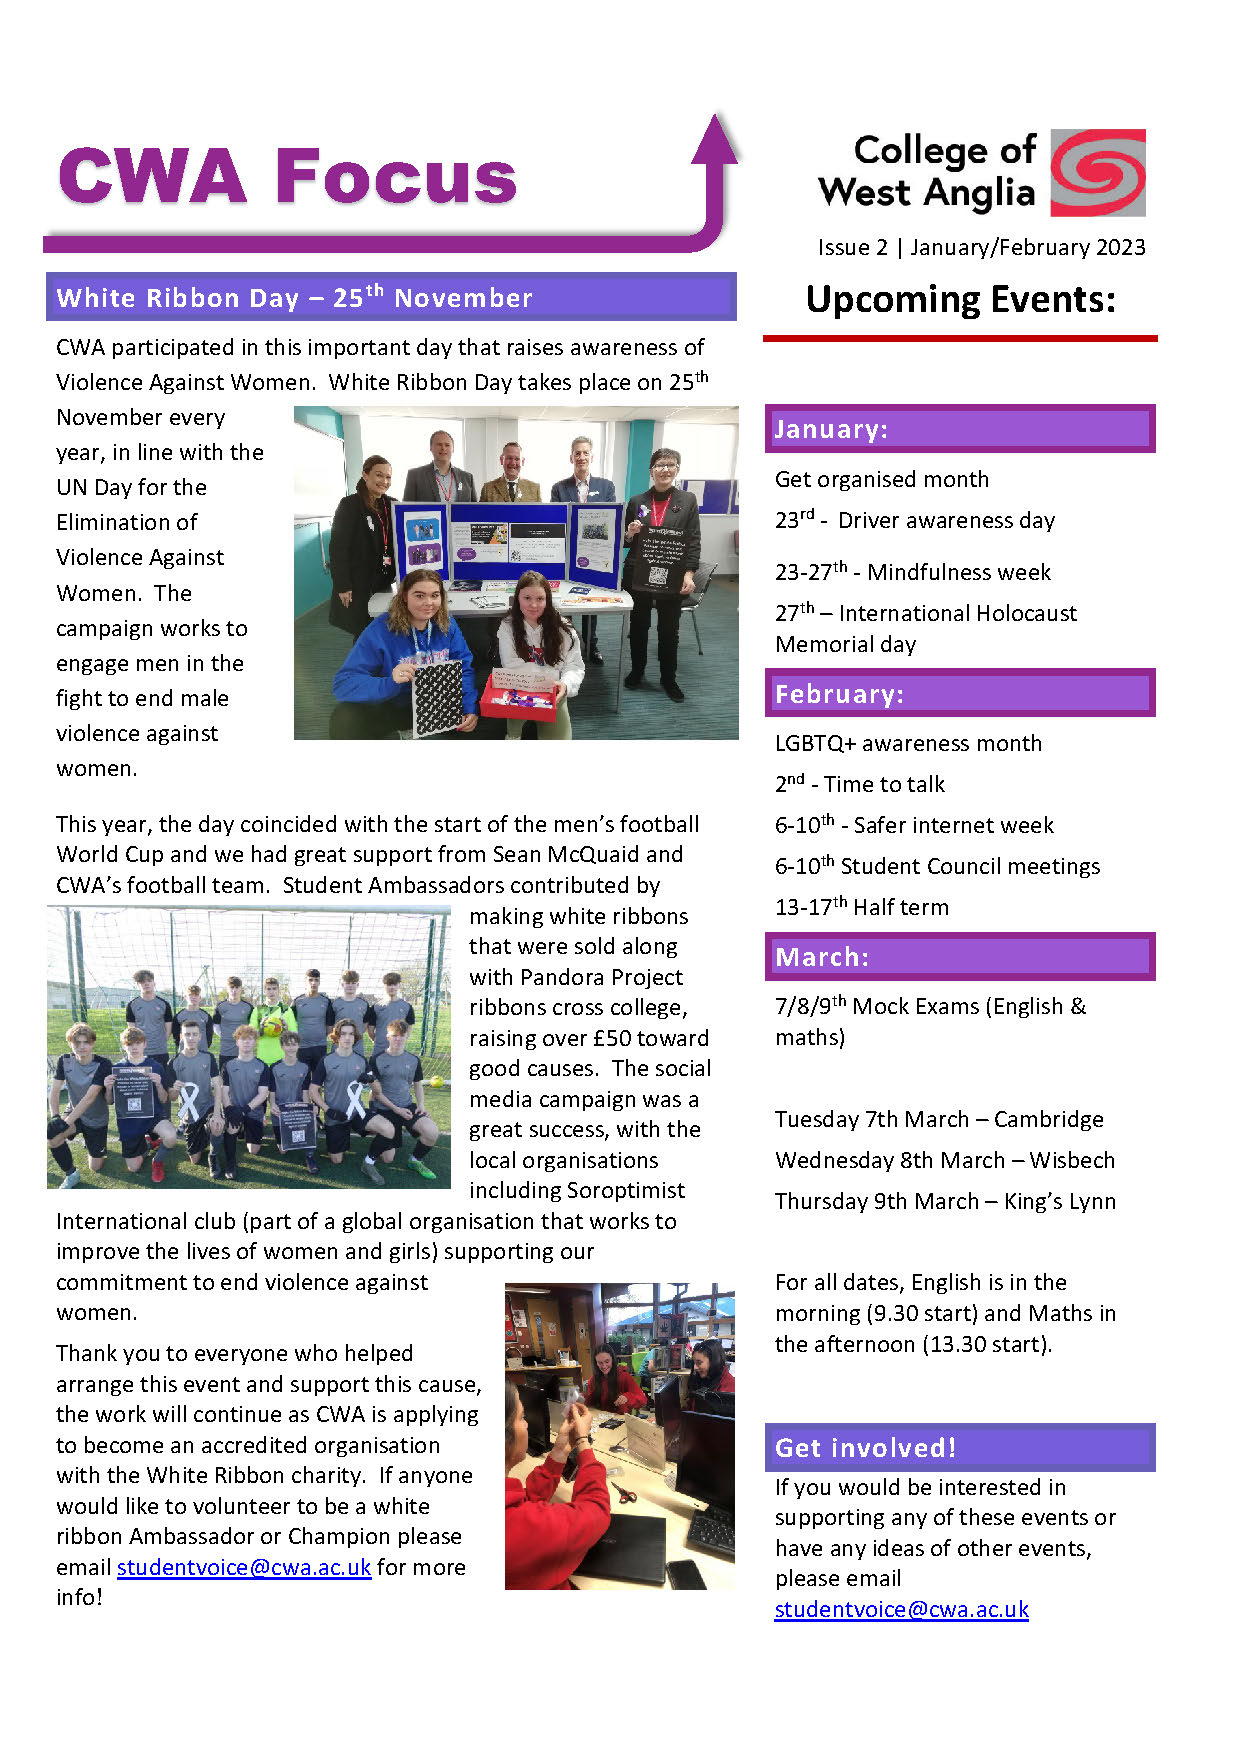 CWA Focus Issue 1 Page 1